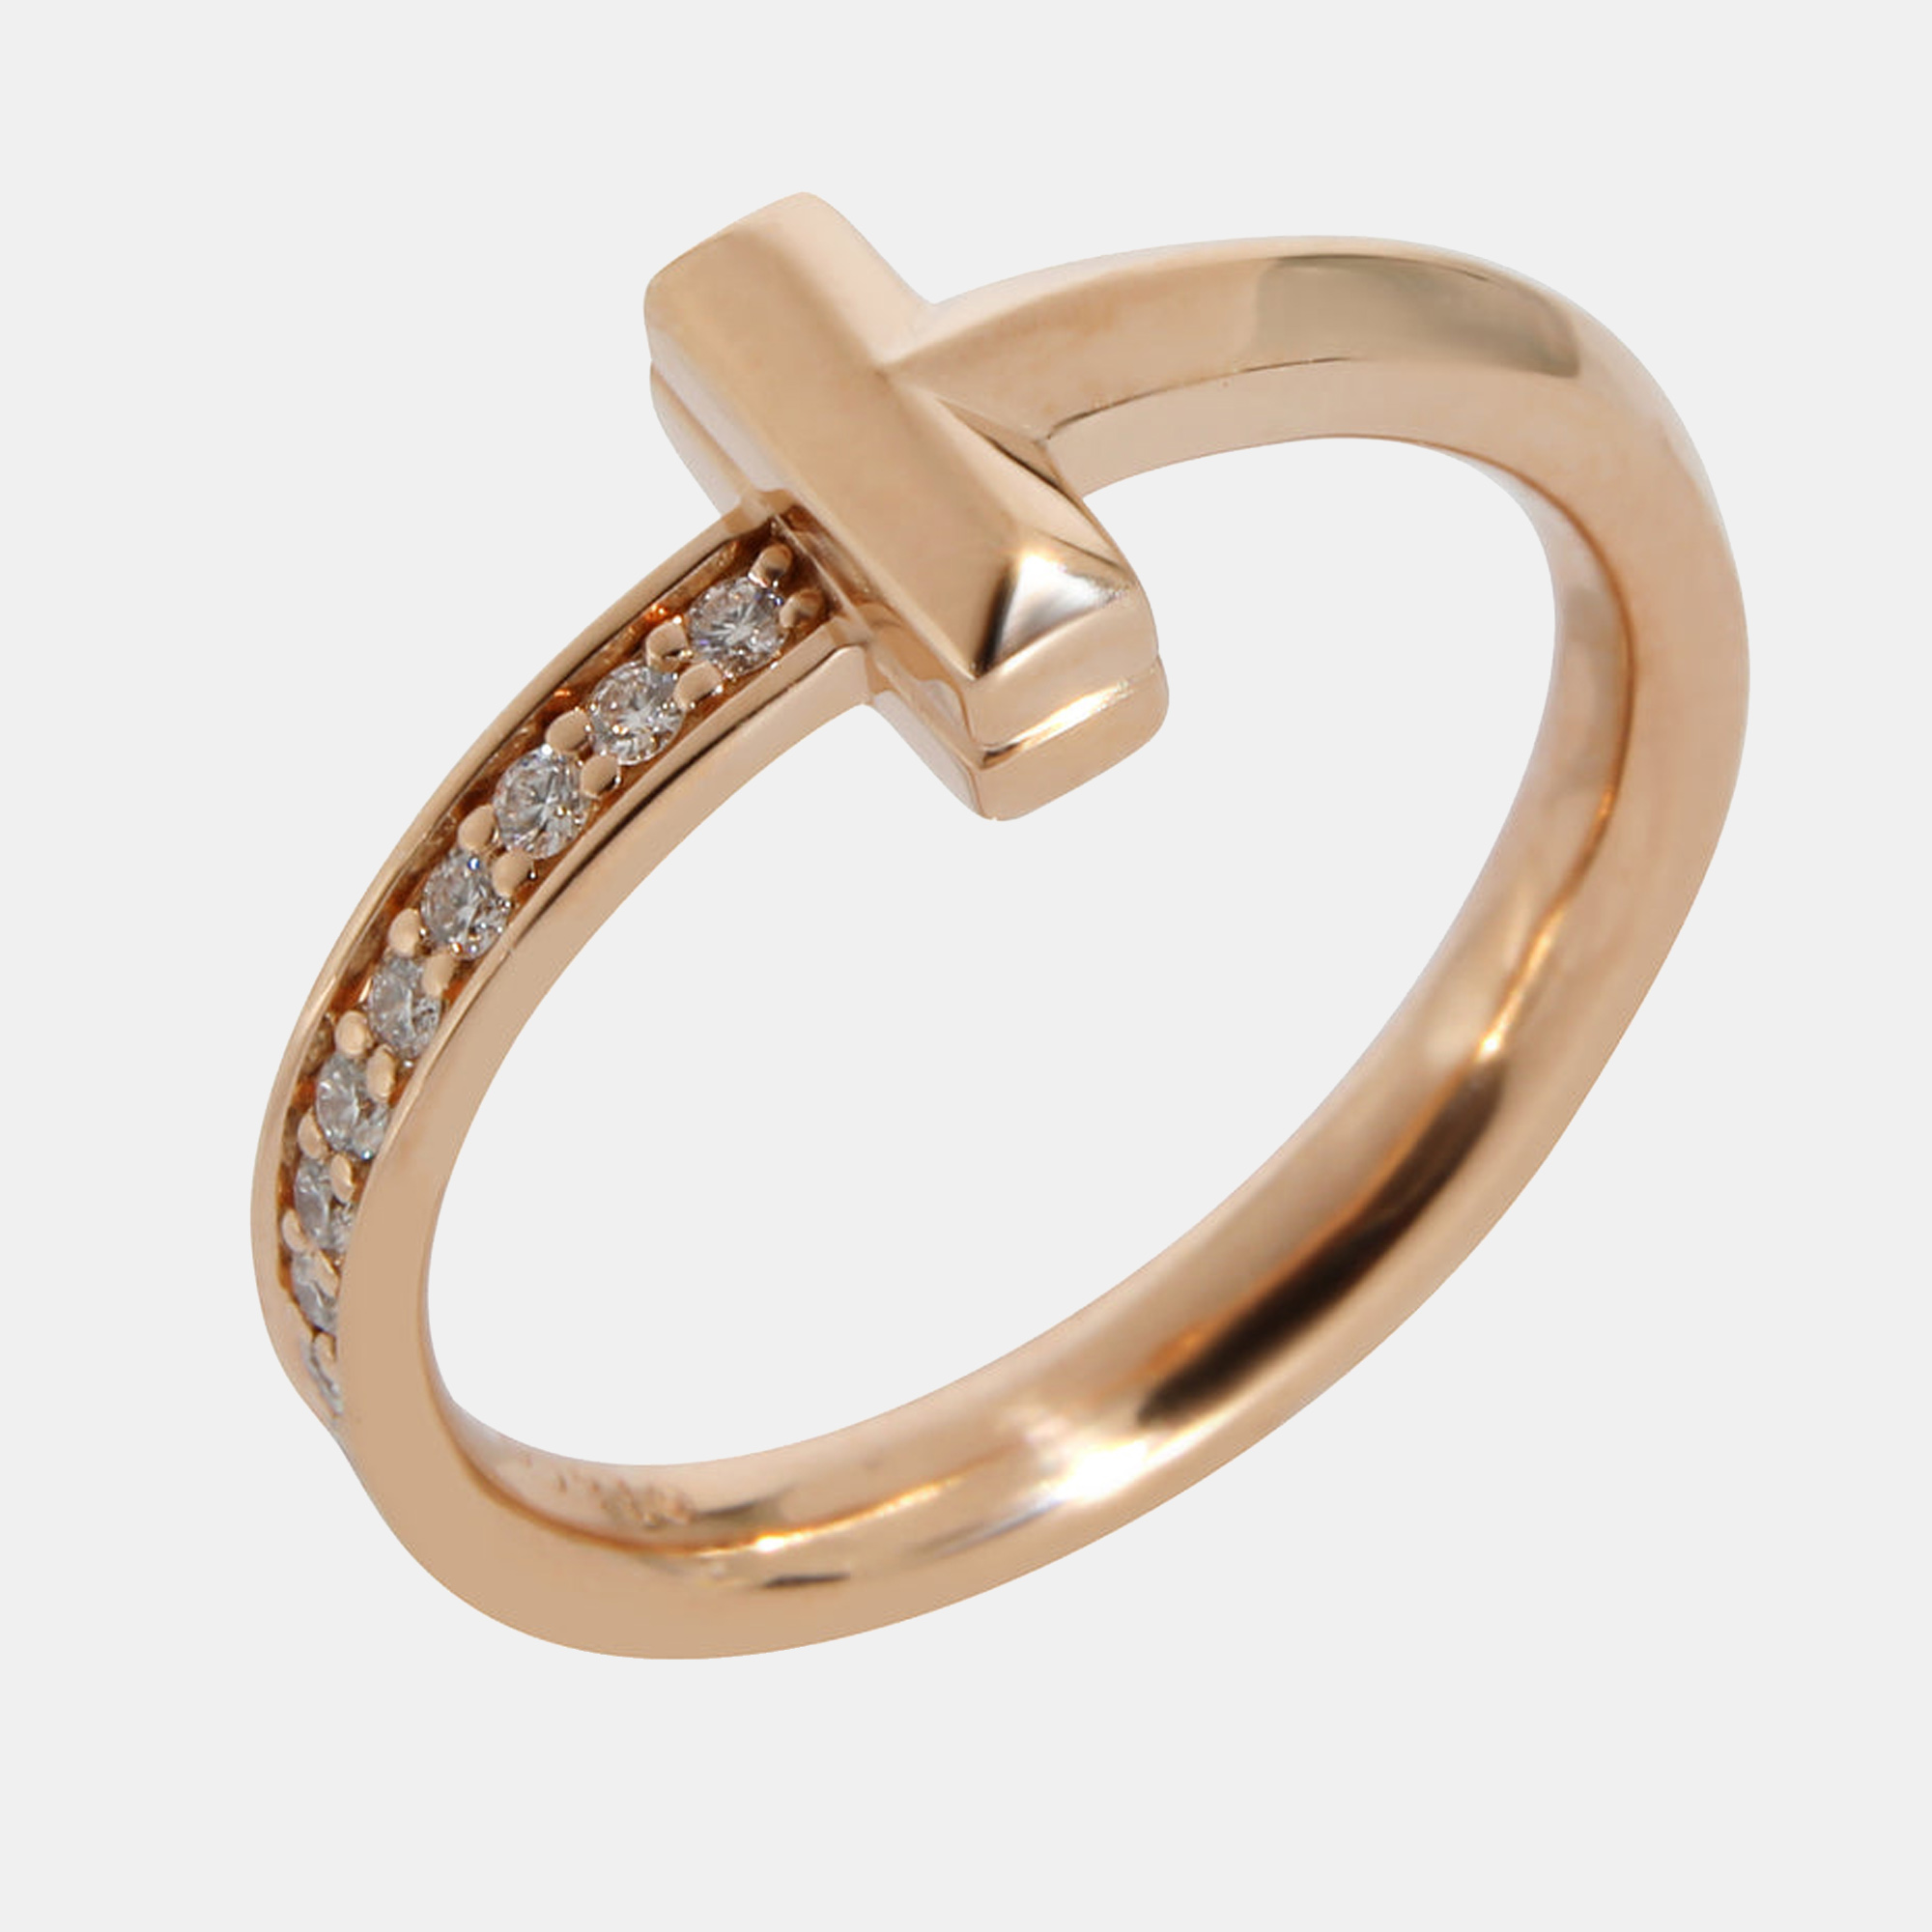 Tiffany & Co. Tiffany T Ring In 18k Rose Gold 0.08 CTW Ring US 5.25